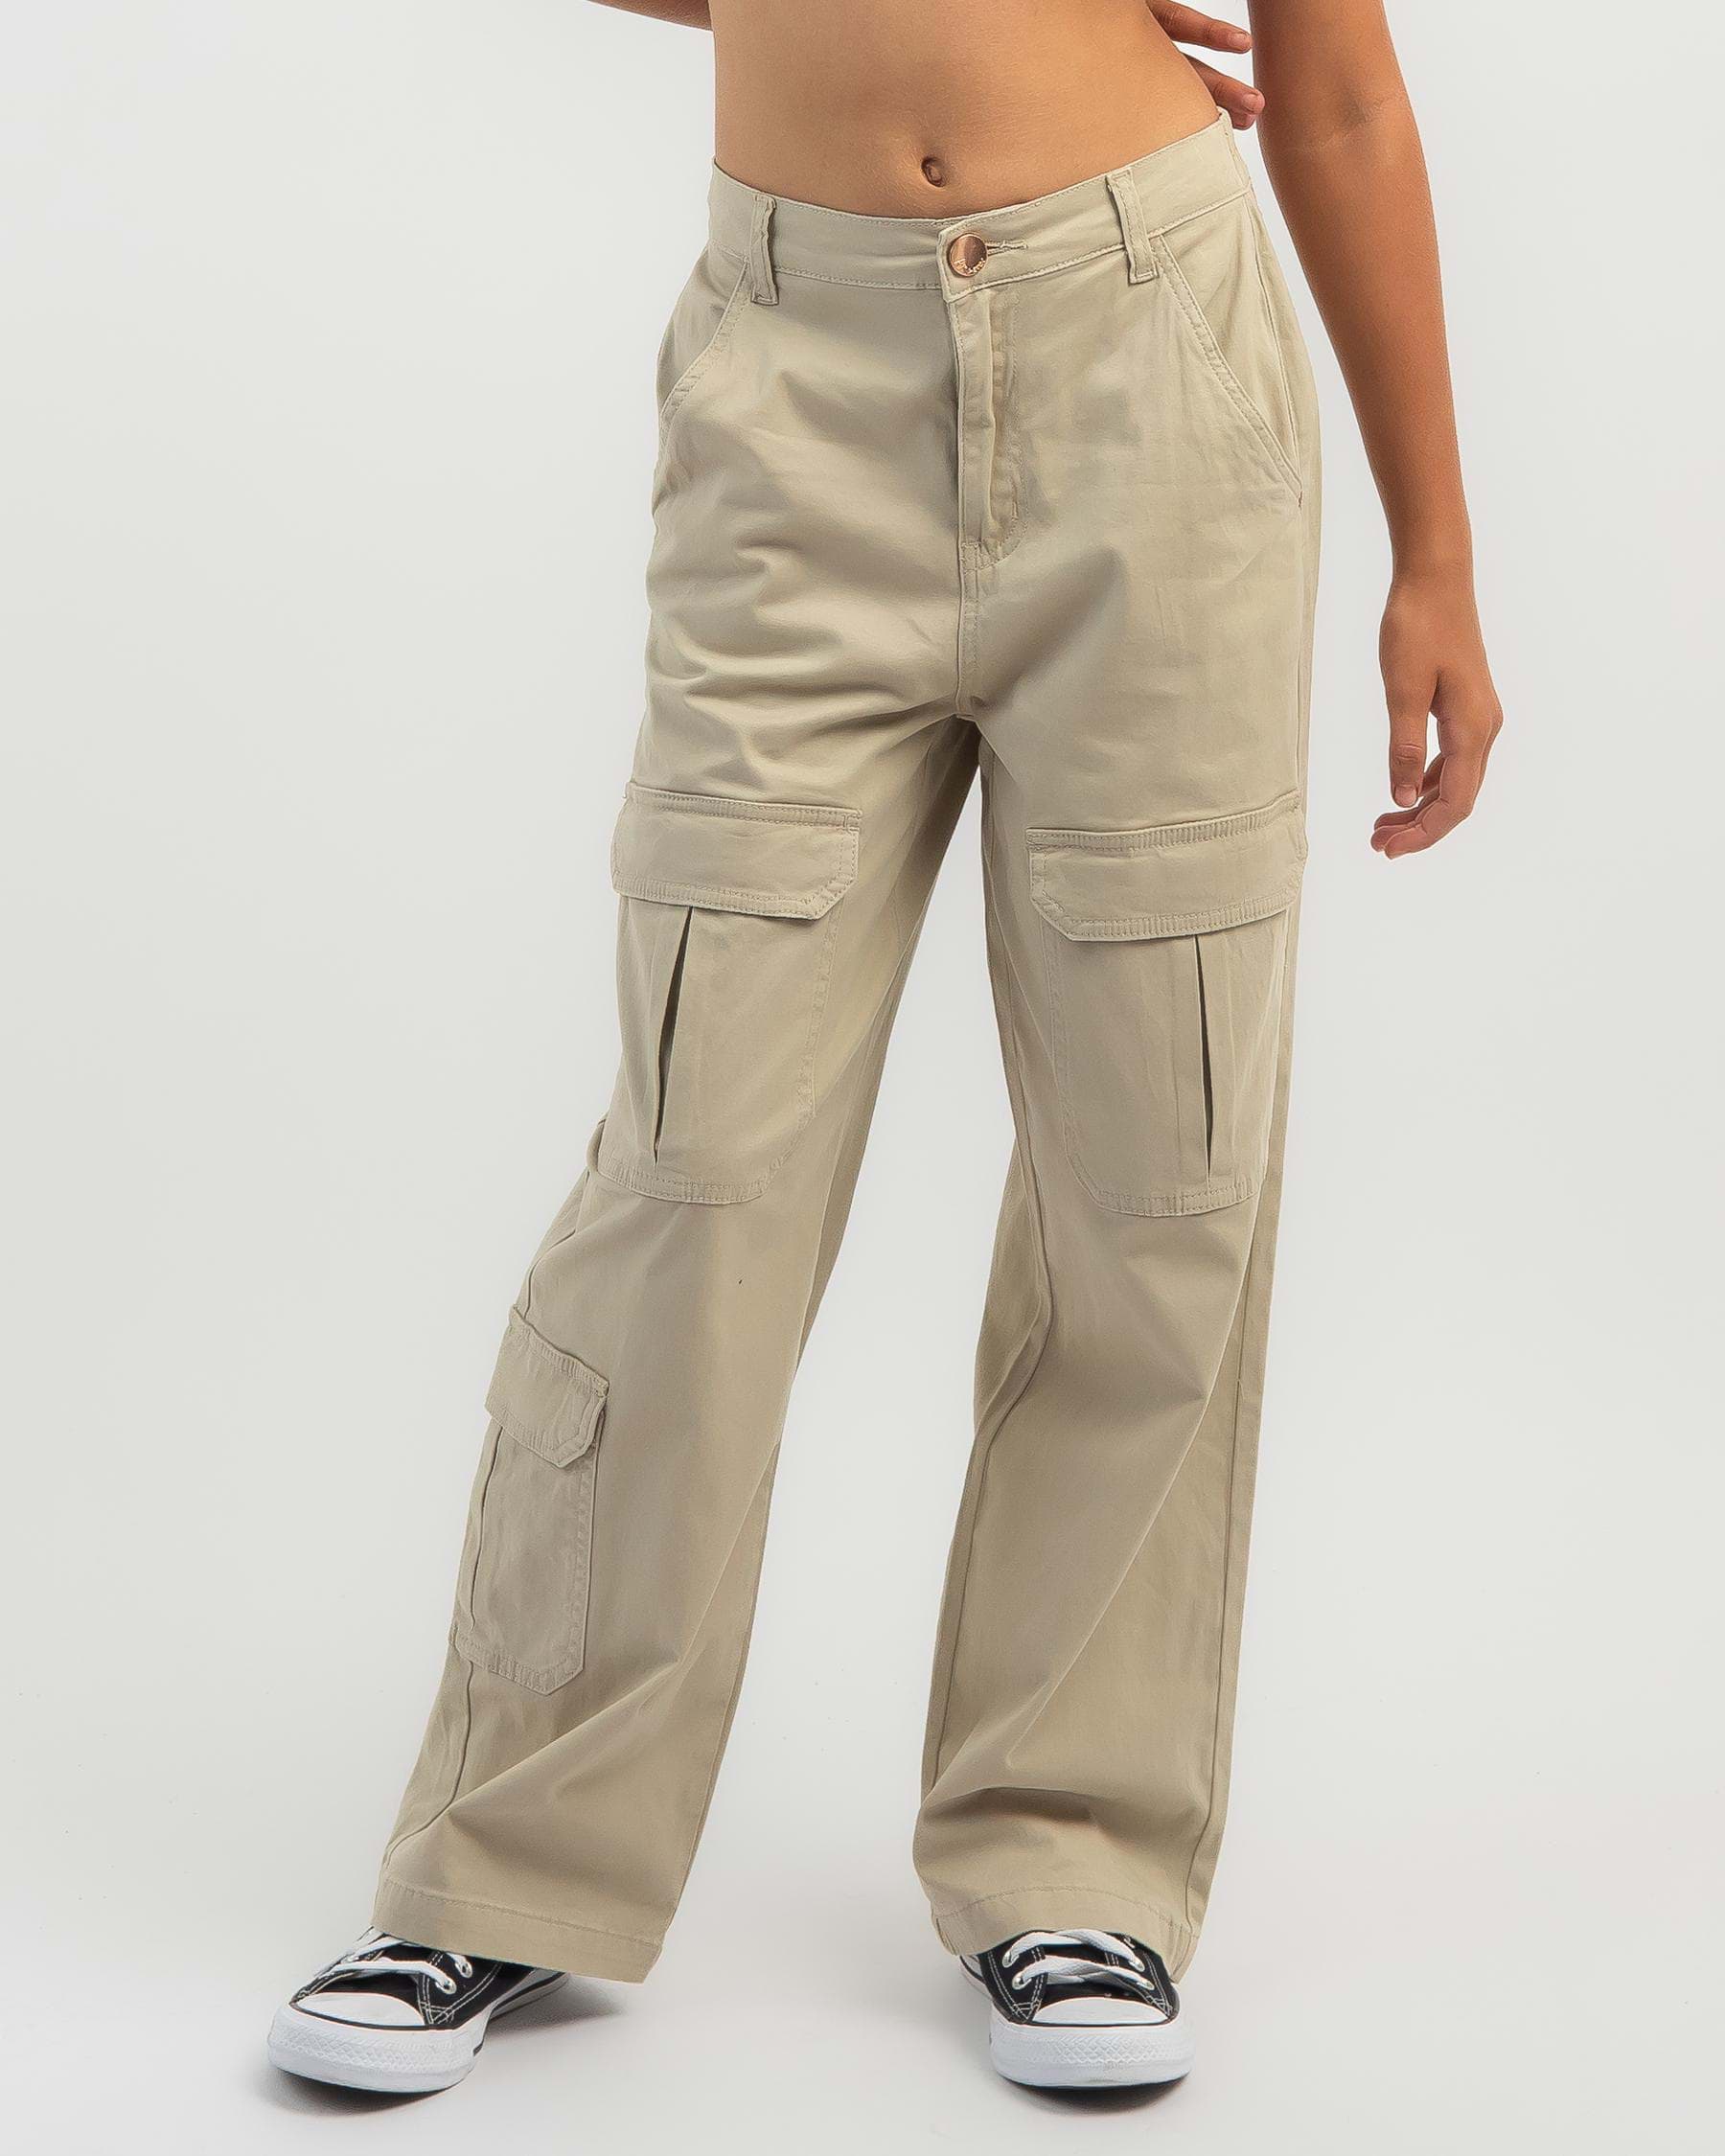 Shop Ava And Ever Girls' Crew Pants In Beige - Fast Shipping & Easy ...